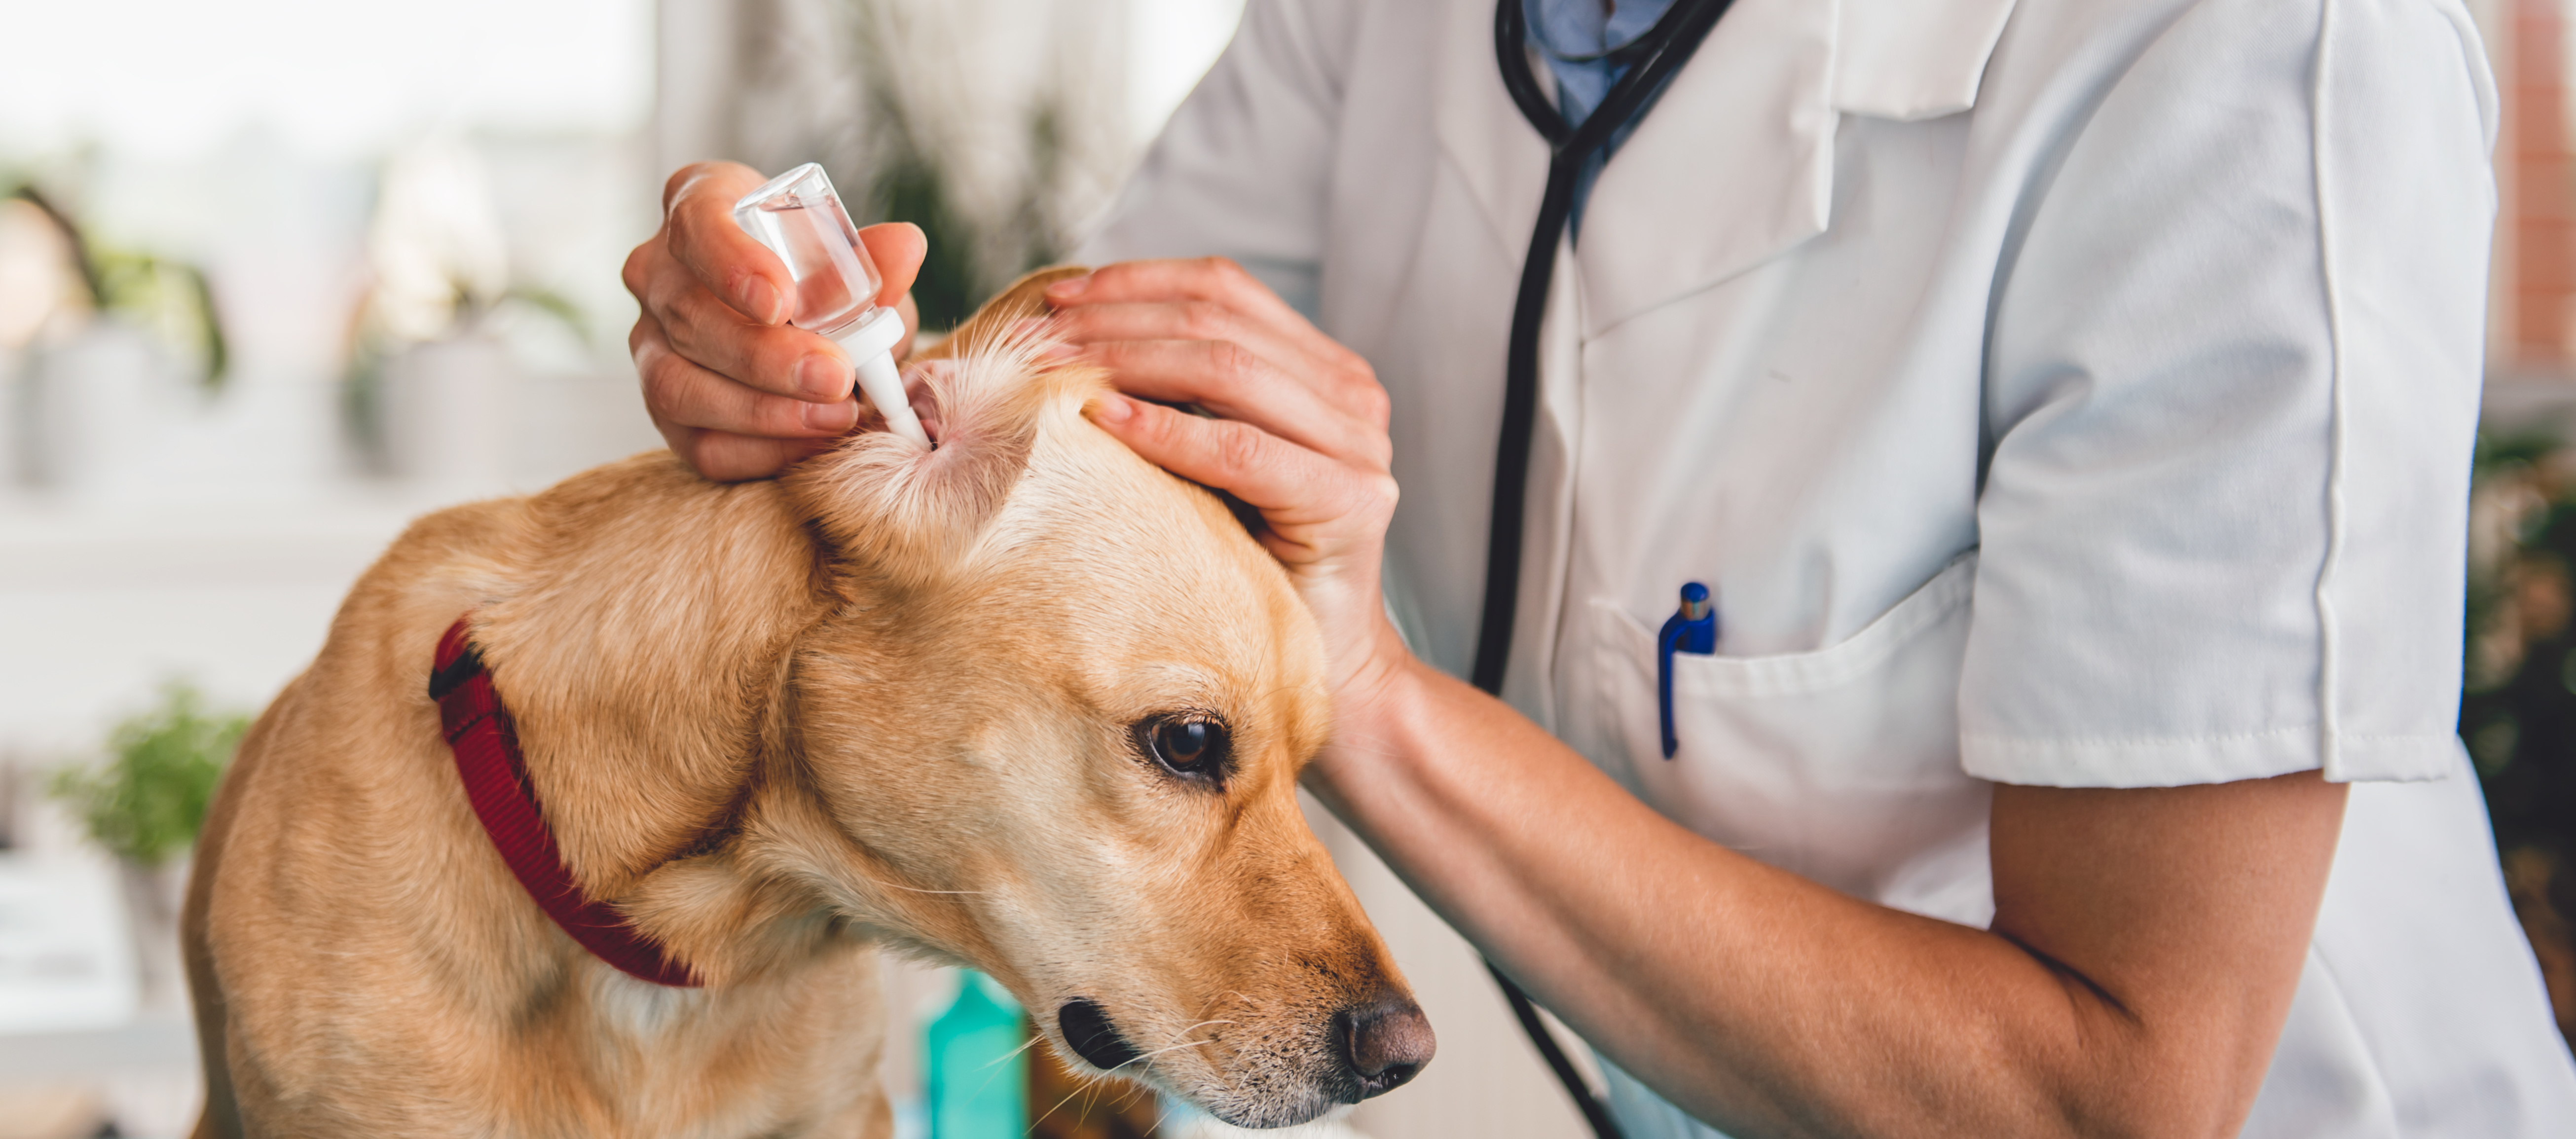 There’s A Training Tip For That – Administering Dog Ear Drops